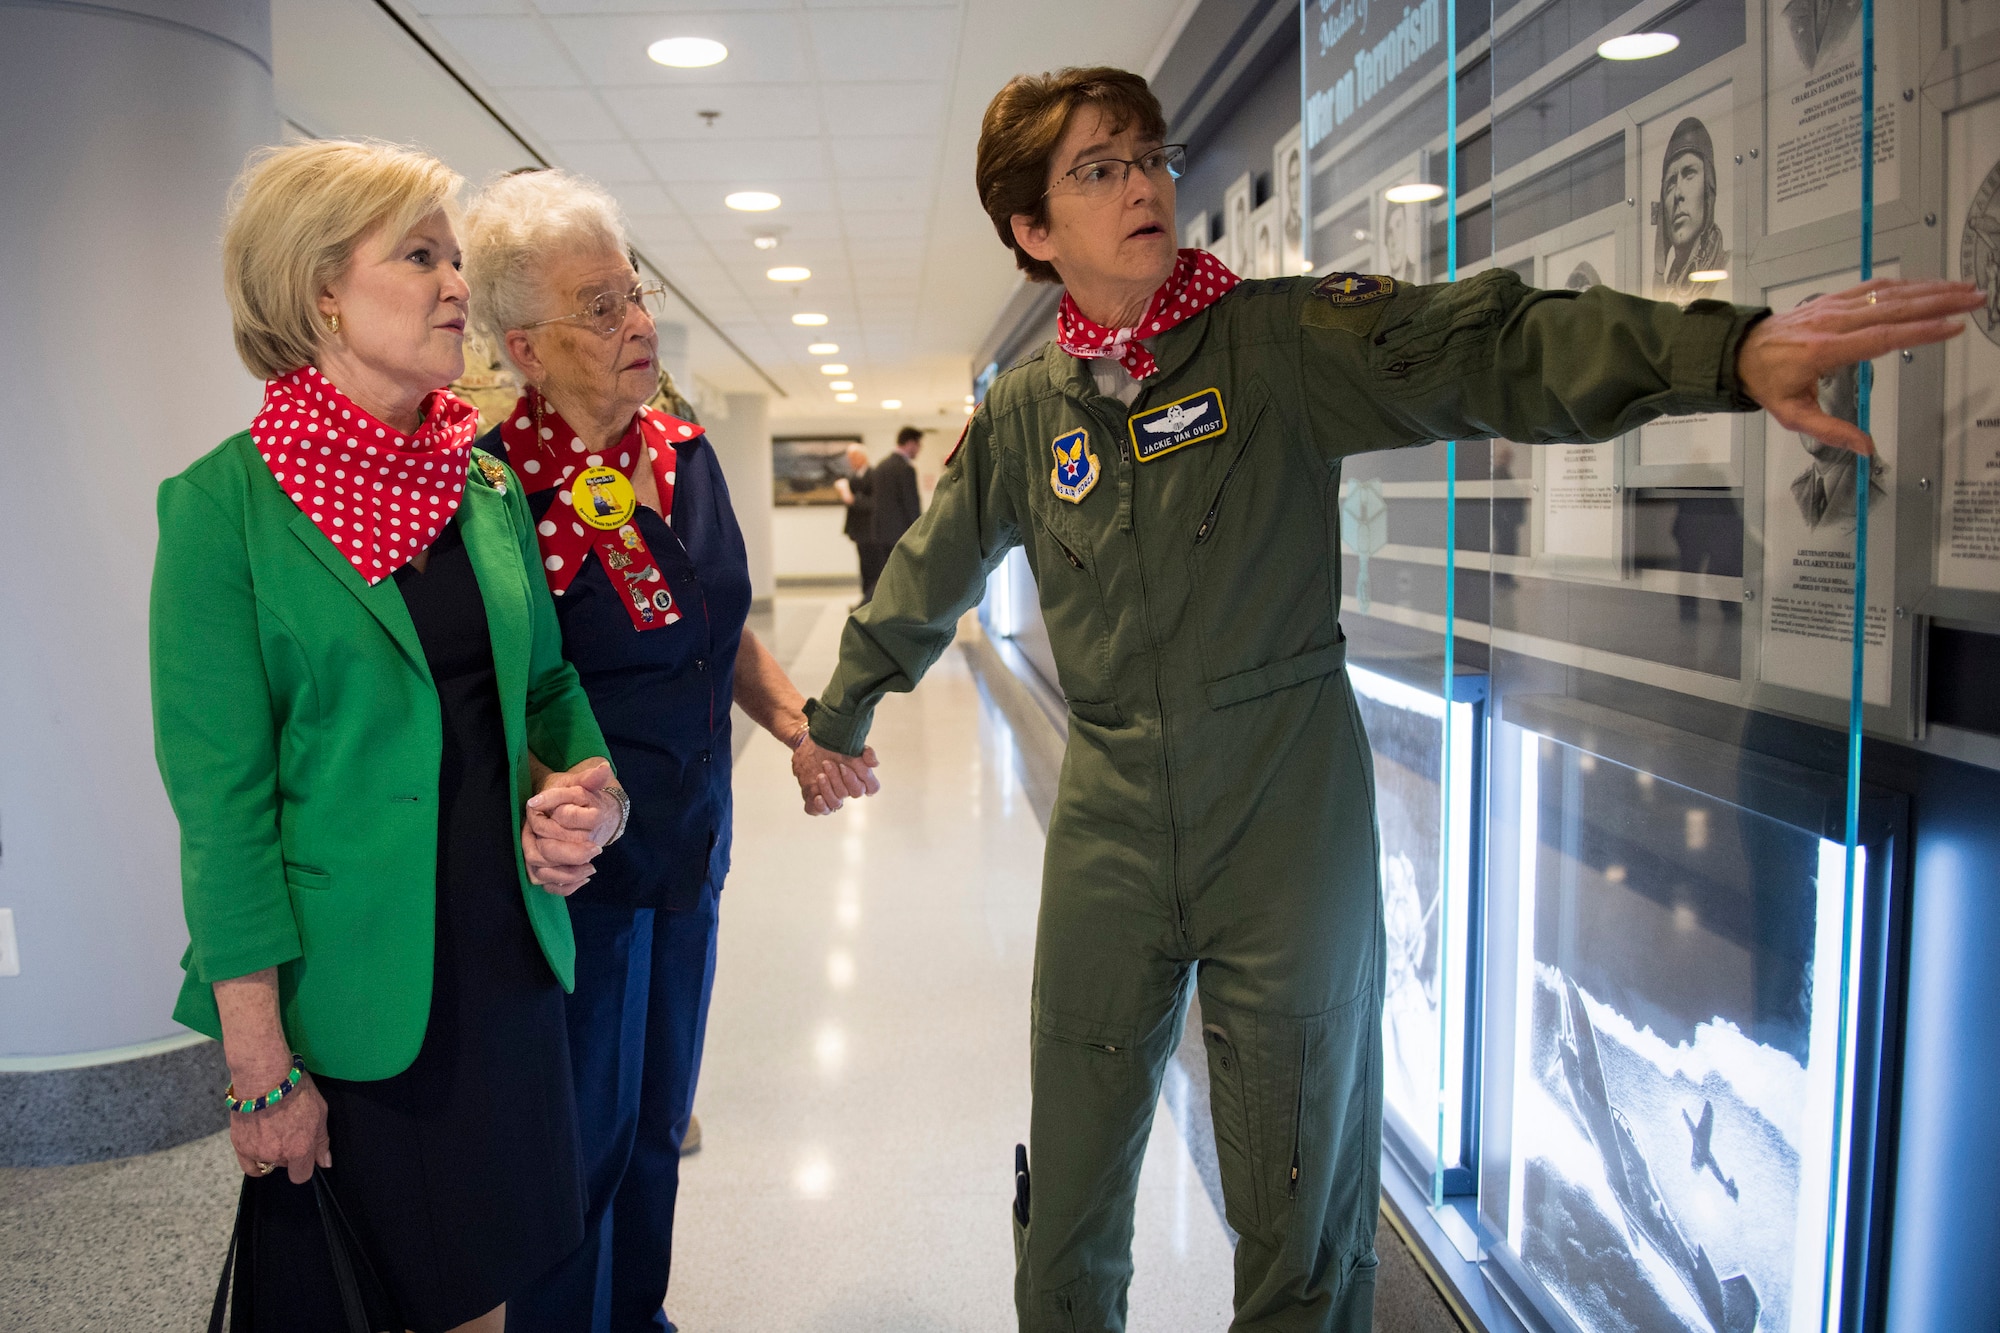 Lt. Gen. Jacqueline D. Van Ovost, Headquarters Air Force director of staff, gives Mae Krier, an original Rosie the Riveter a tour of the Pentagon in Arlington, Va., March 20, 2019. Krier was accompanied by Dawn Goldfein, the spouse of Air Force Chief of Staff Gen. David L. Goldfein. (U.S. Air Force photo by Adrian Cadiz)